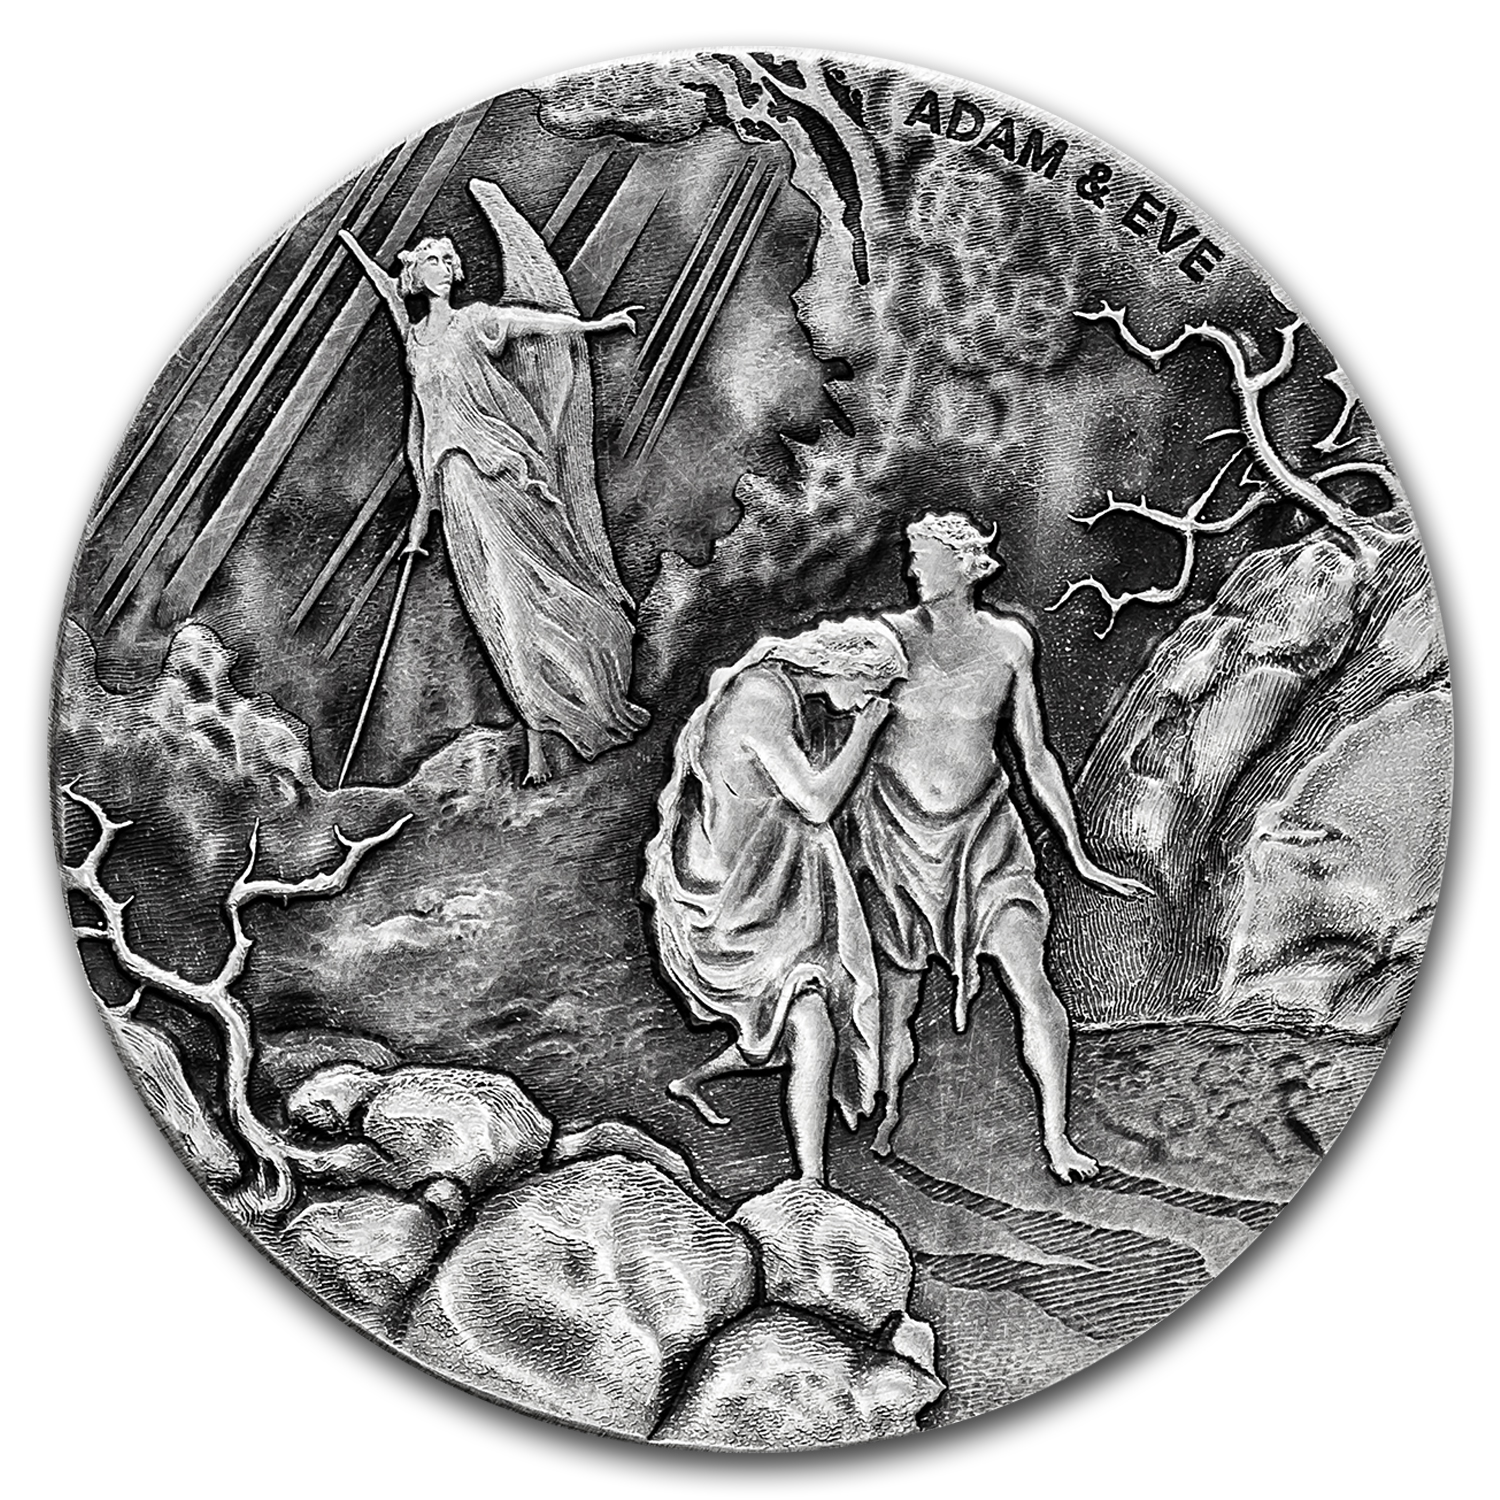 Buy 2016 2 oz Silver Coin - Biblical Series (Adam and Eve)